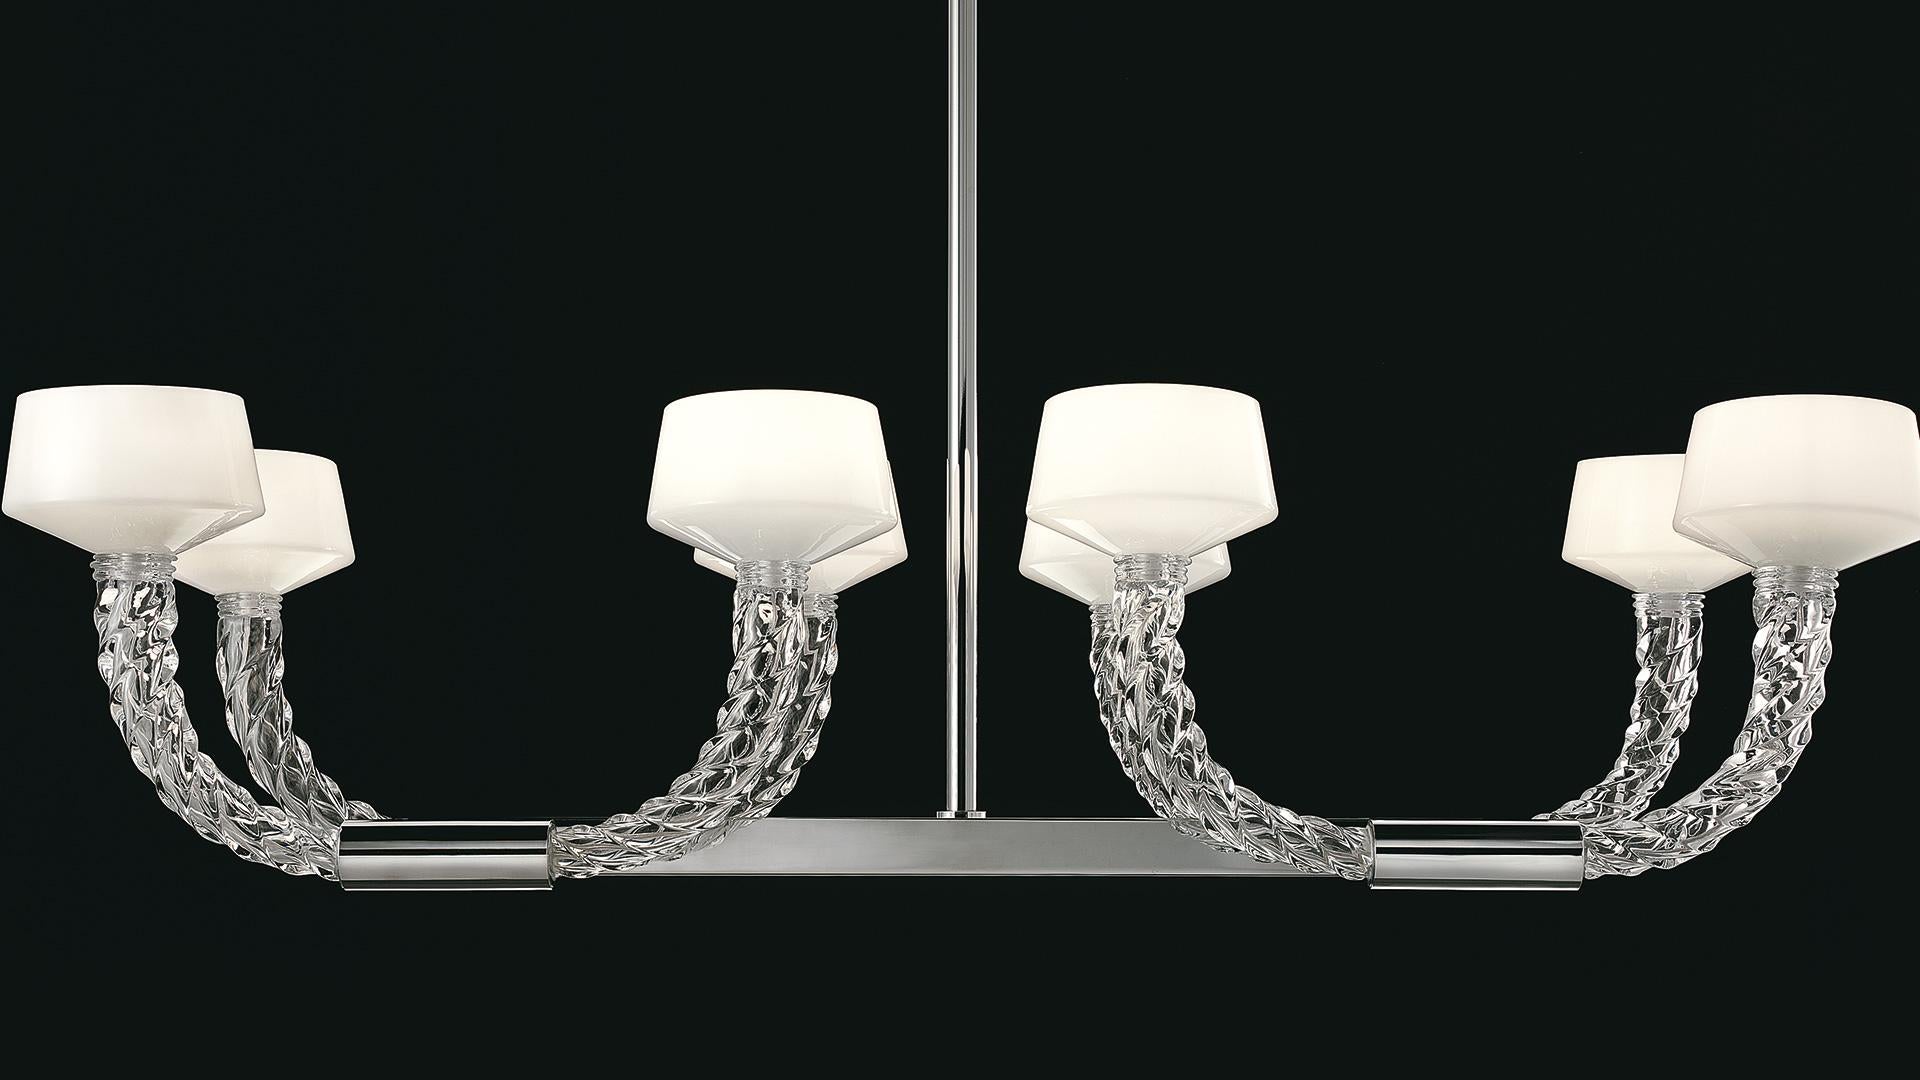 Twins 7226 12 Chandelier in Glass with Chrome Finishing, by Barovier&Toso 1